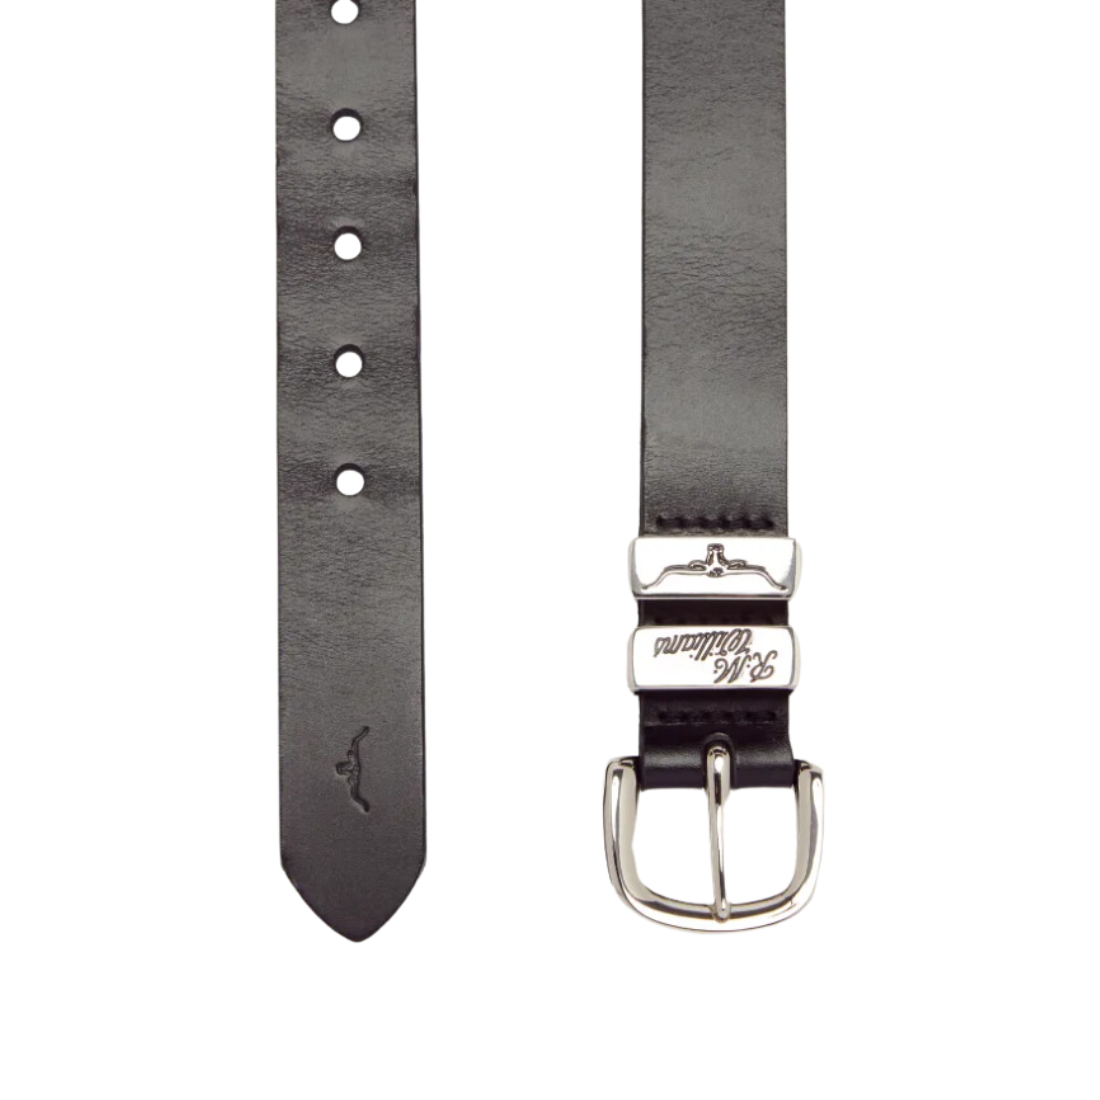 RM Williams 1 1/4 inch Solid Hide Belt